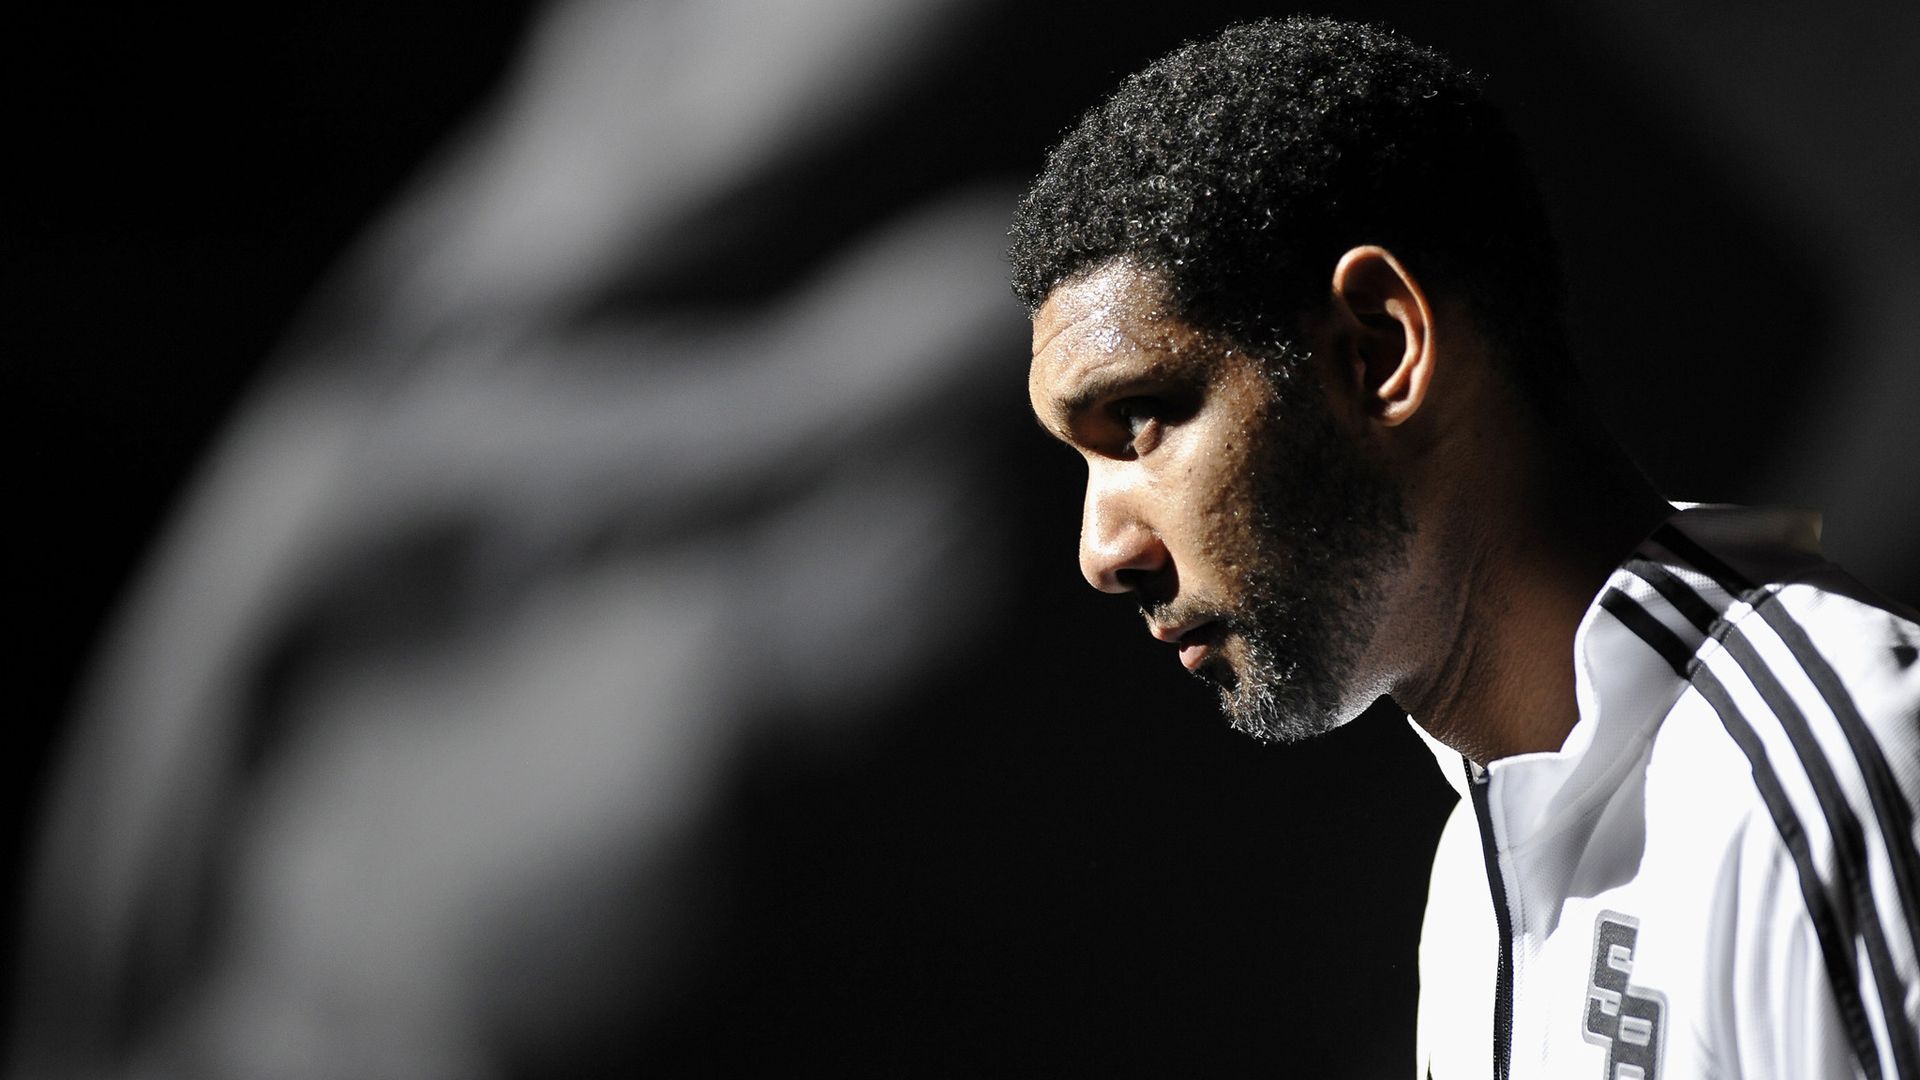 Tim Duncan Wallpapers High Resolution and Quality Download